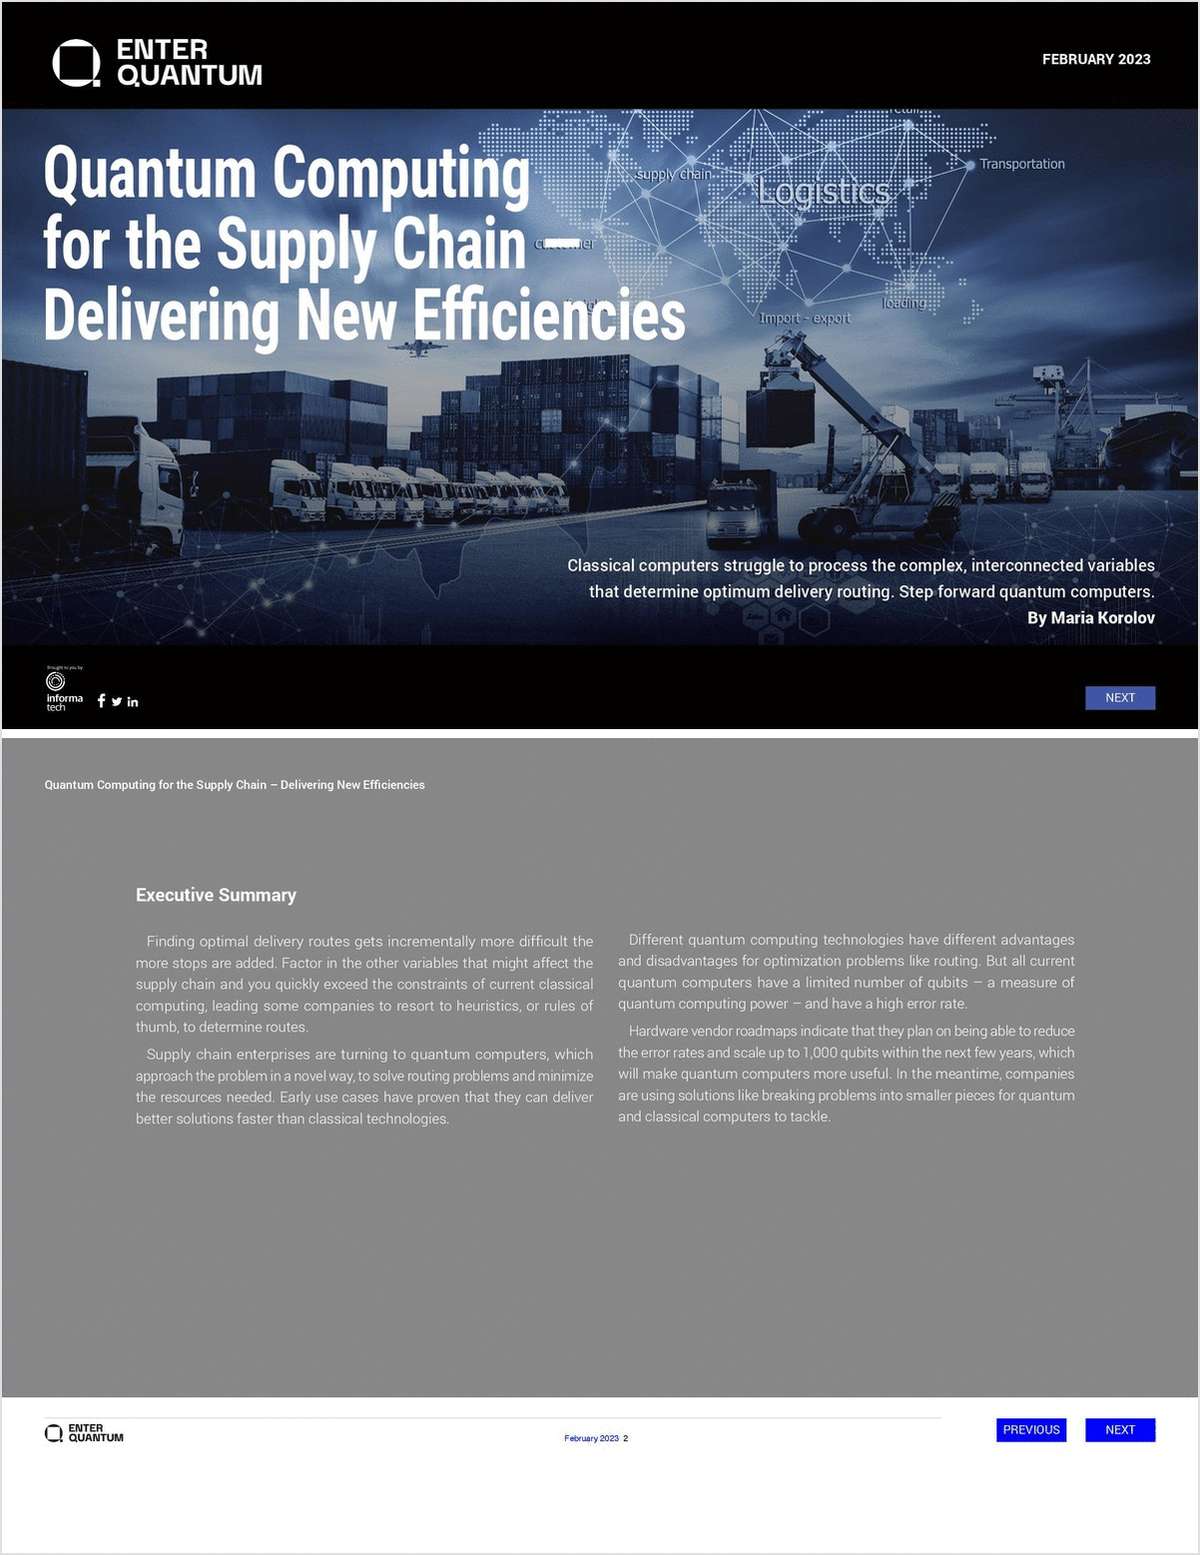 Delivering New Efficiencies: Quantum Computing for the Supply Chain